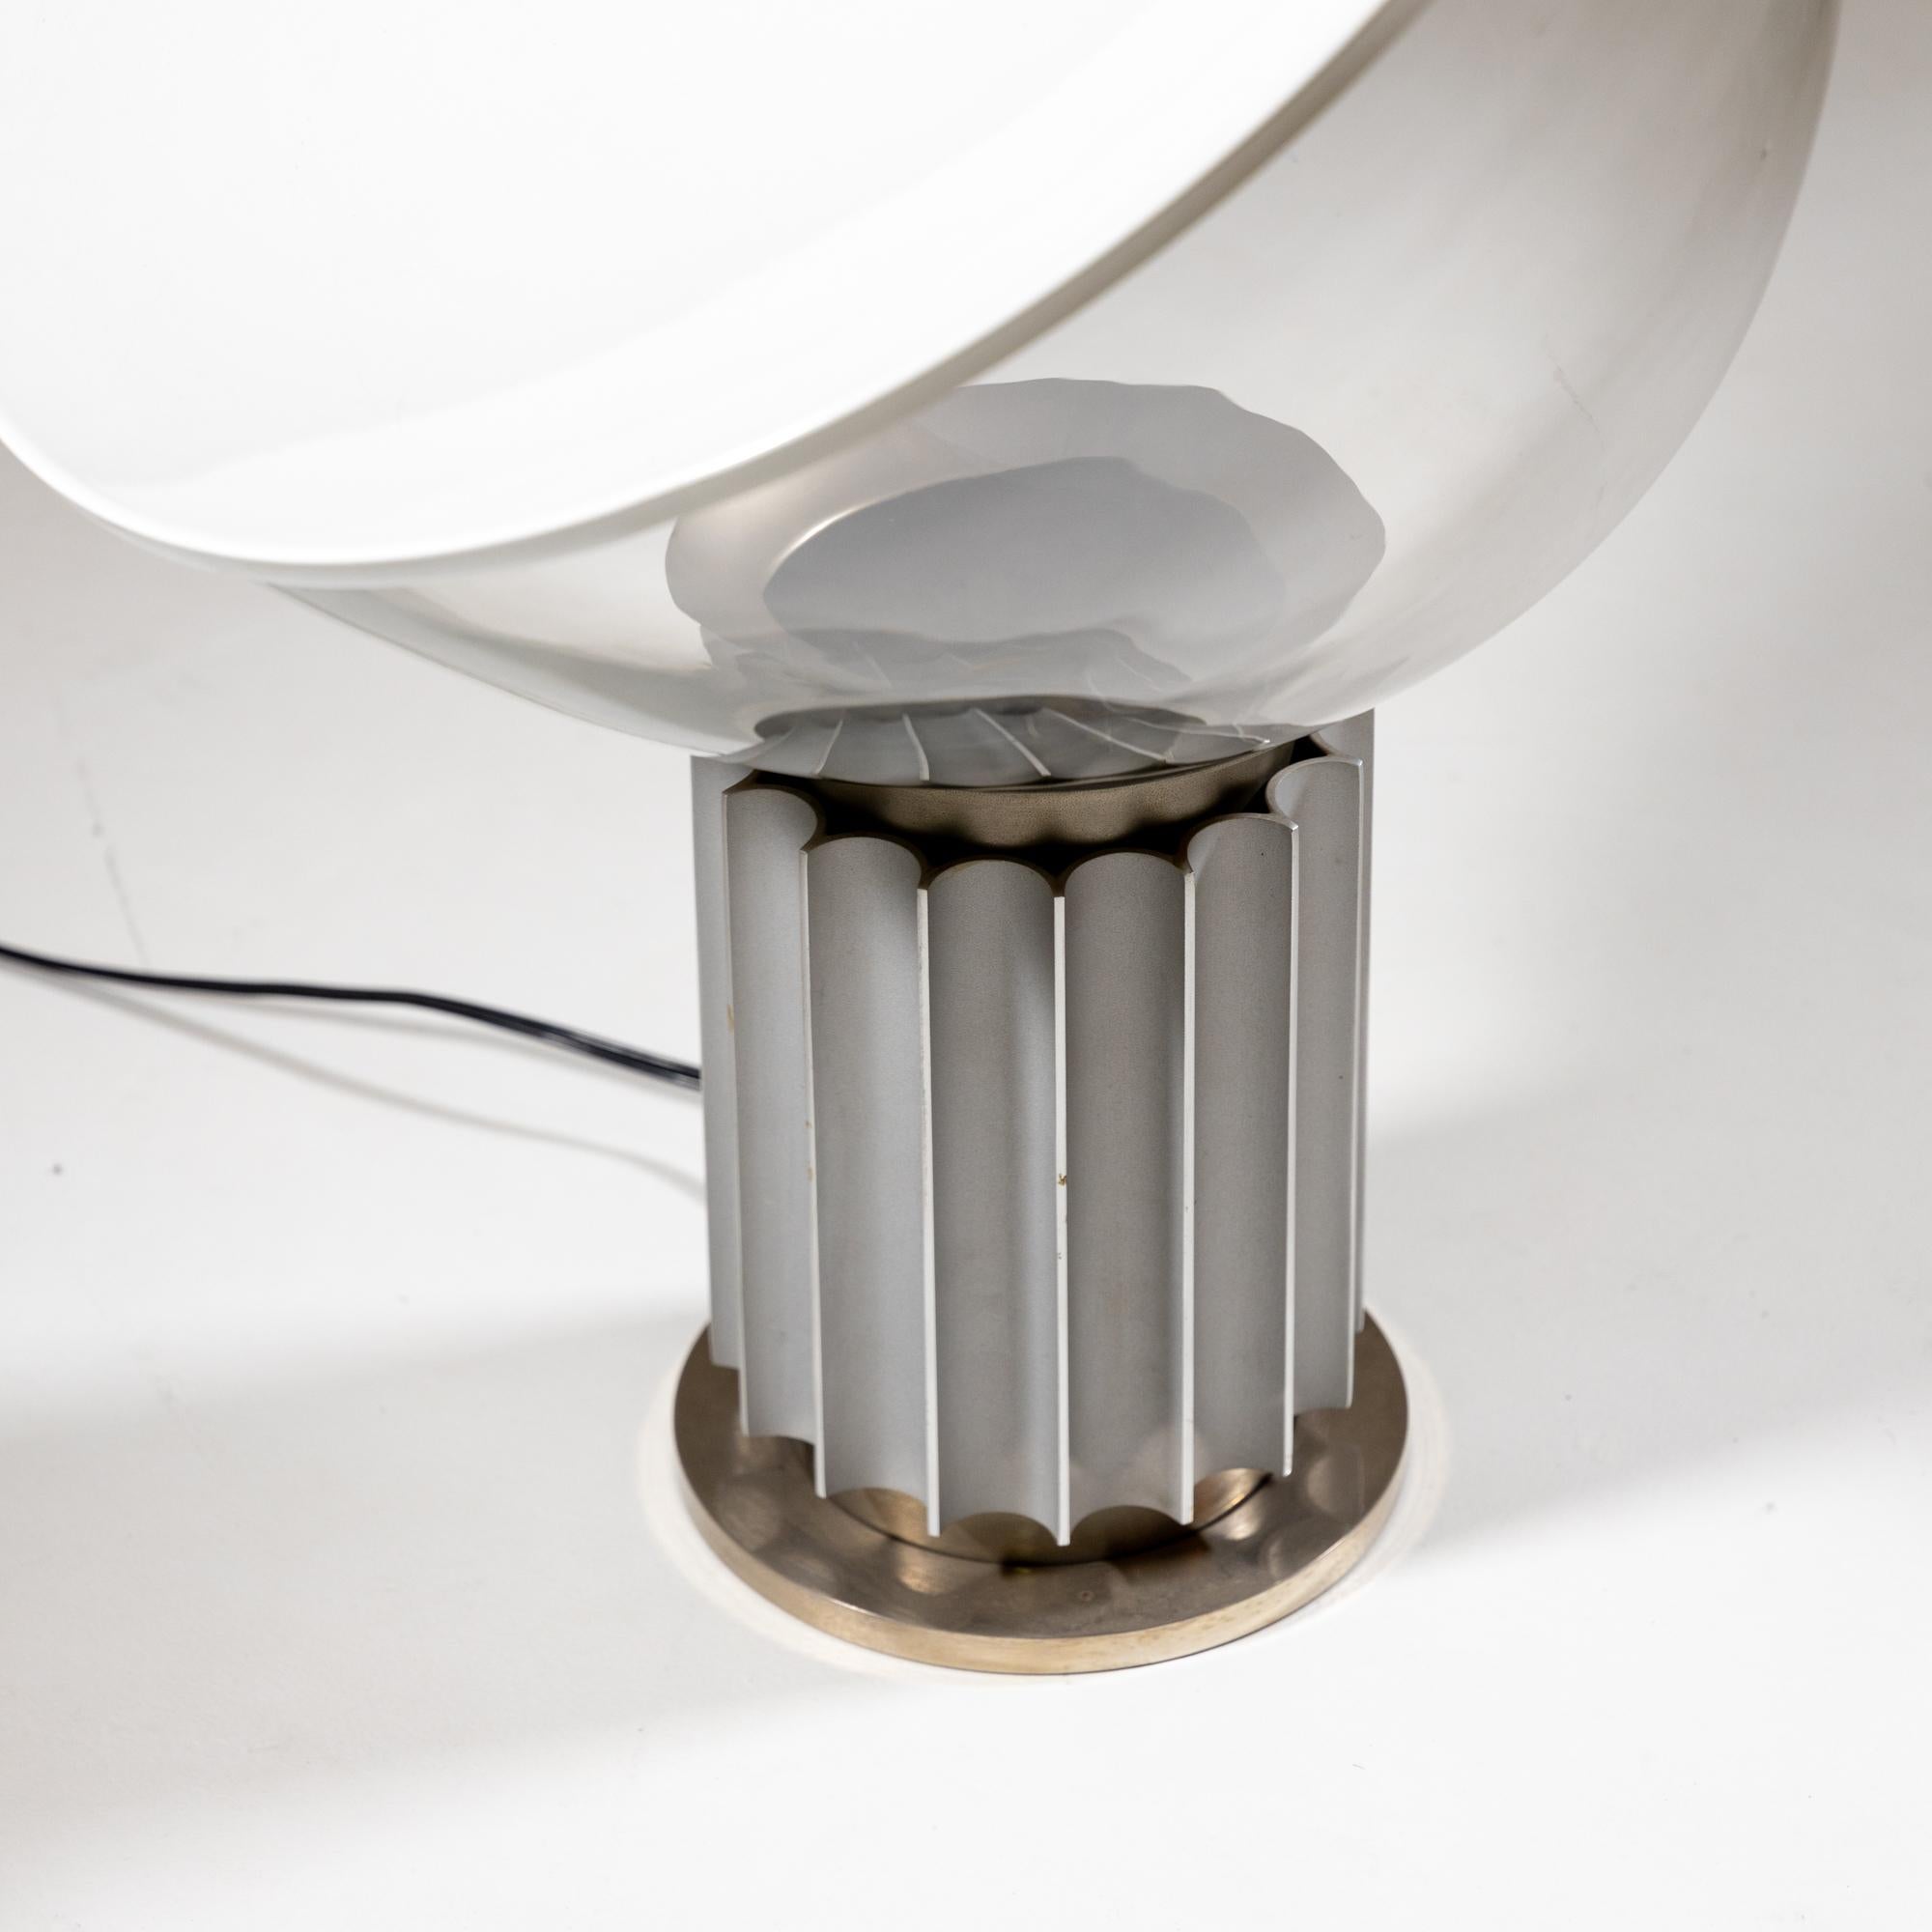 Modern Taccia Table Lamp by Achille & Pier G. Castiglioni for Flos, Italy 20th Century For Sale